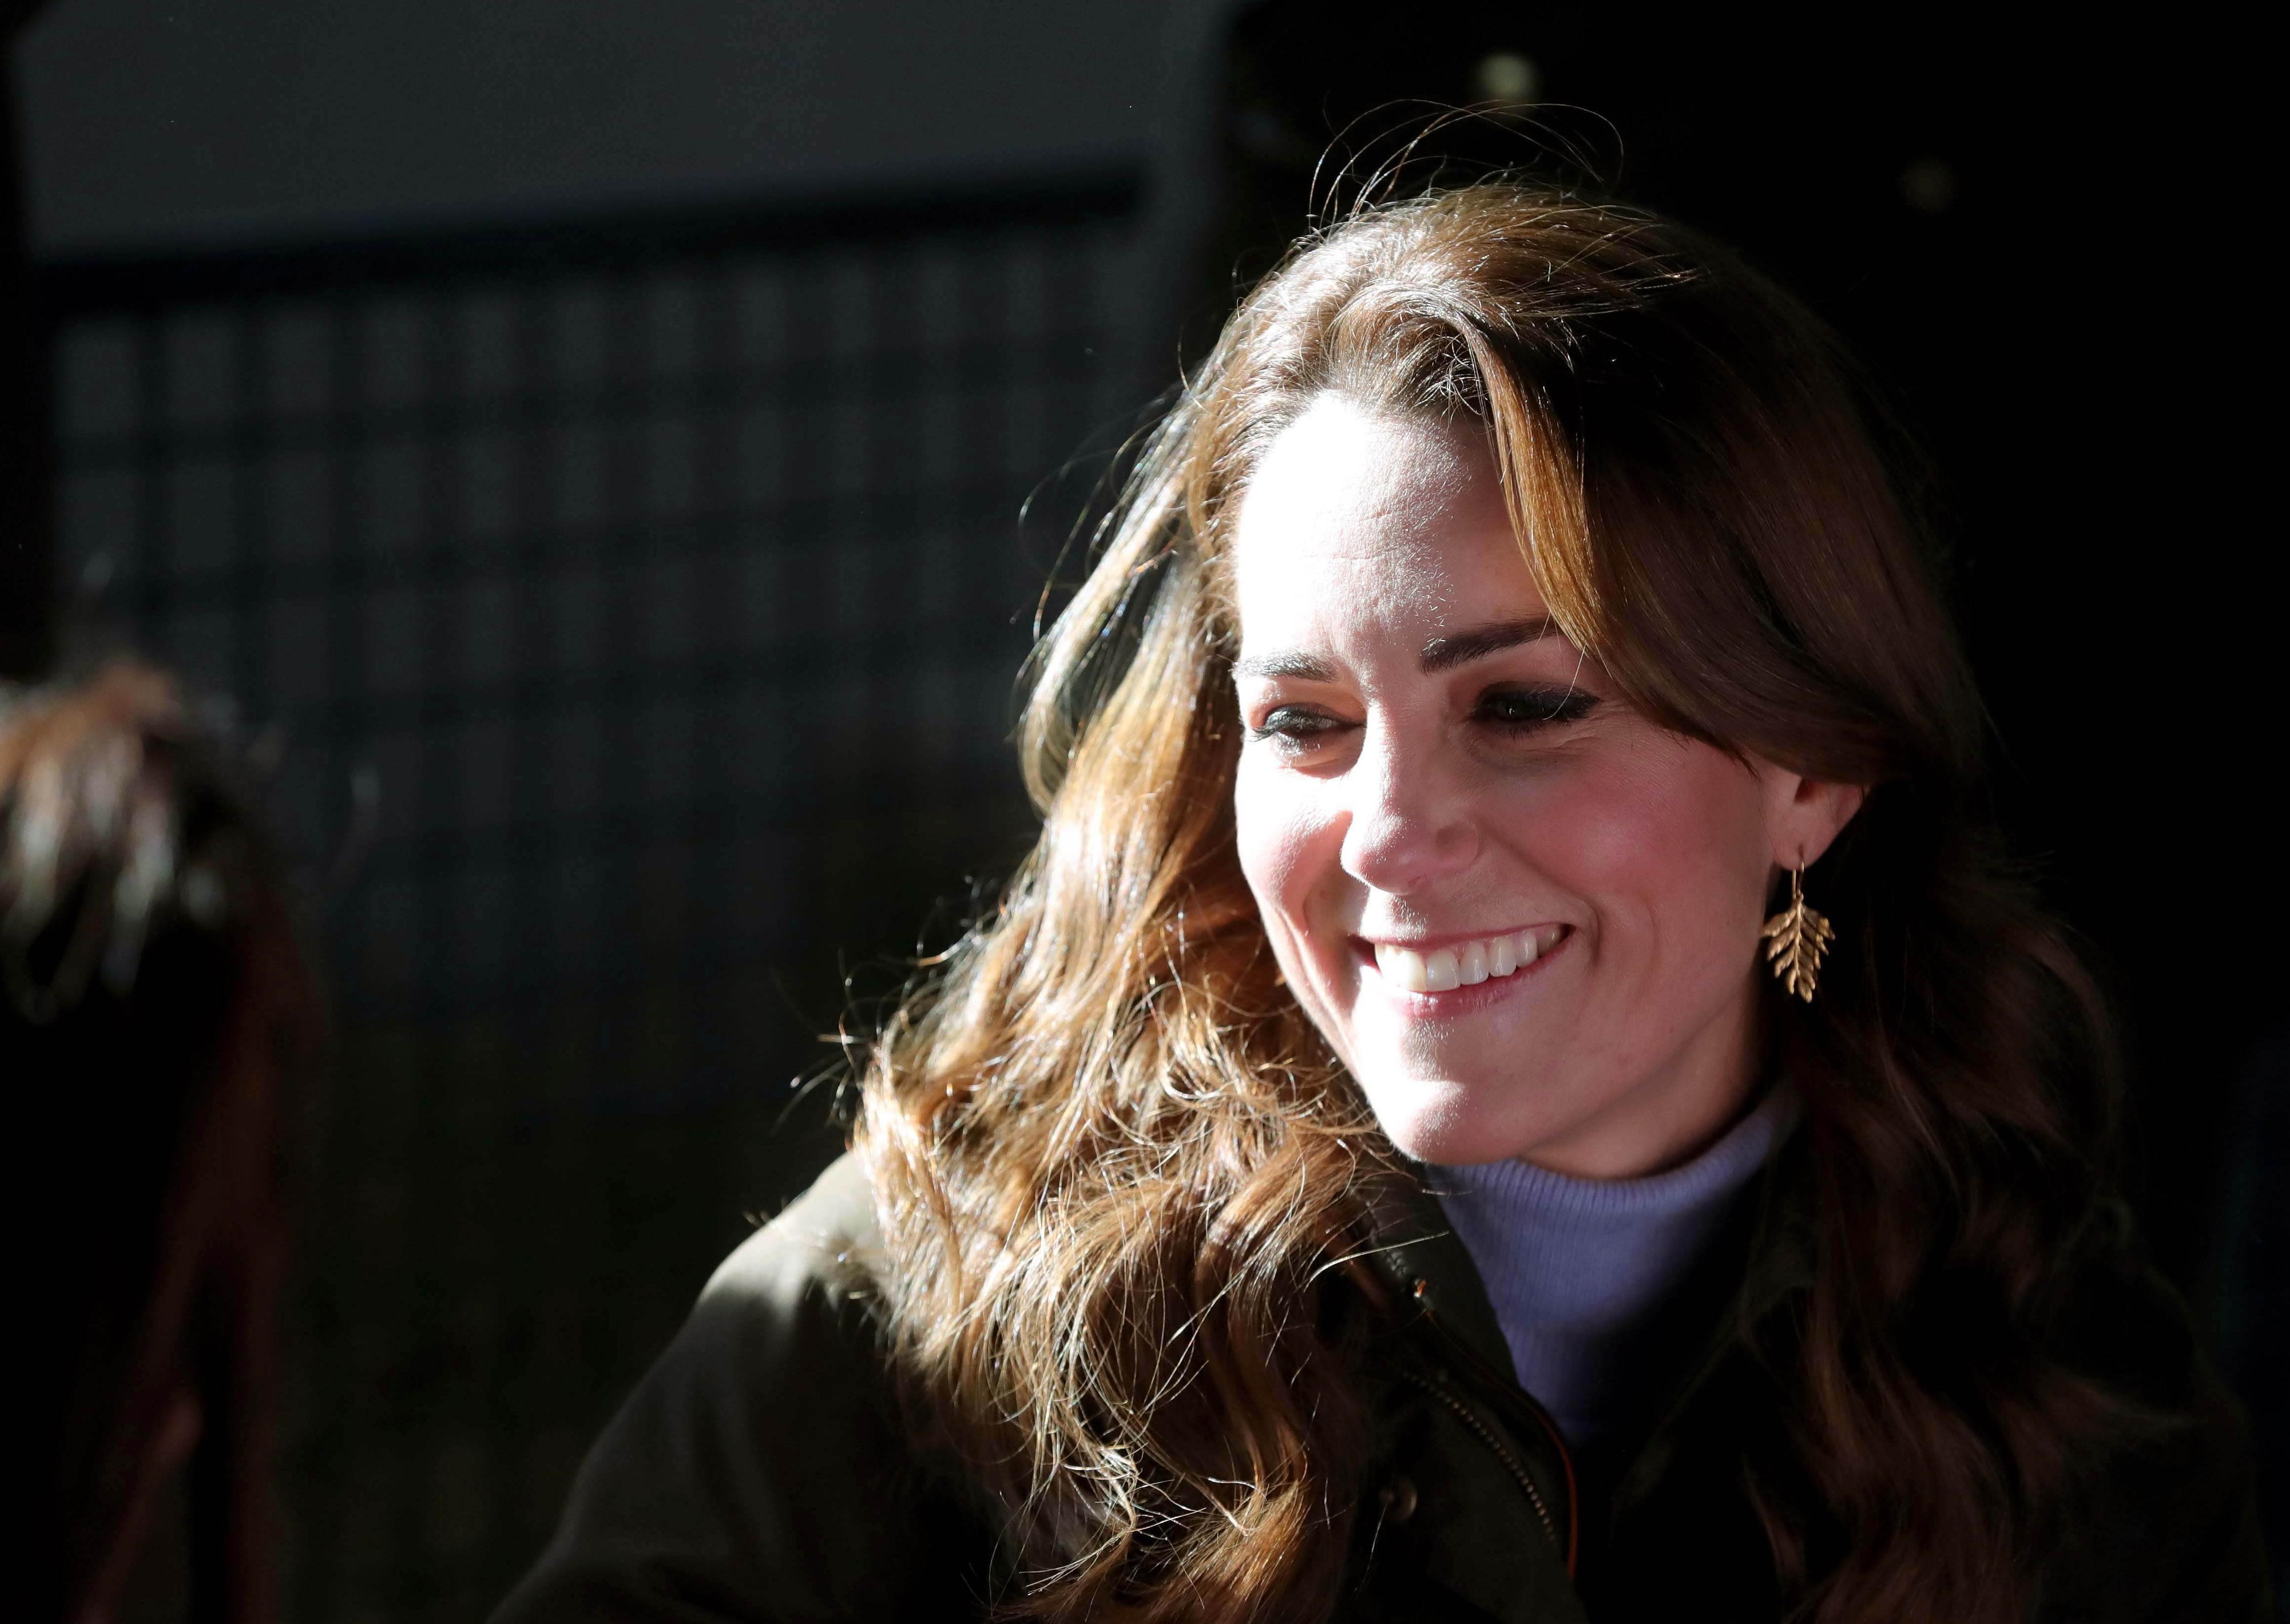 HRH The Duchess of Cambridge pictured at The Ark Open Farm in Newtownard